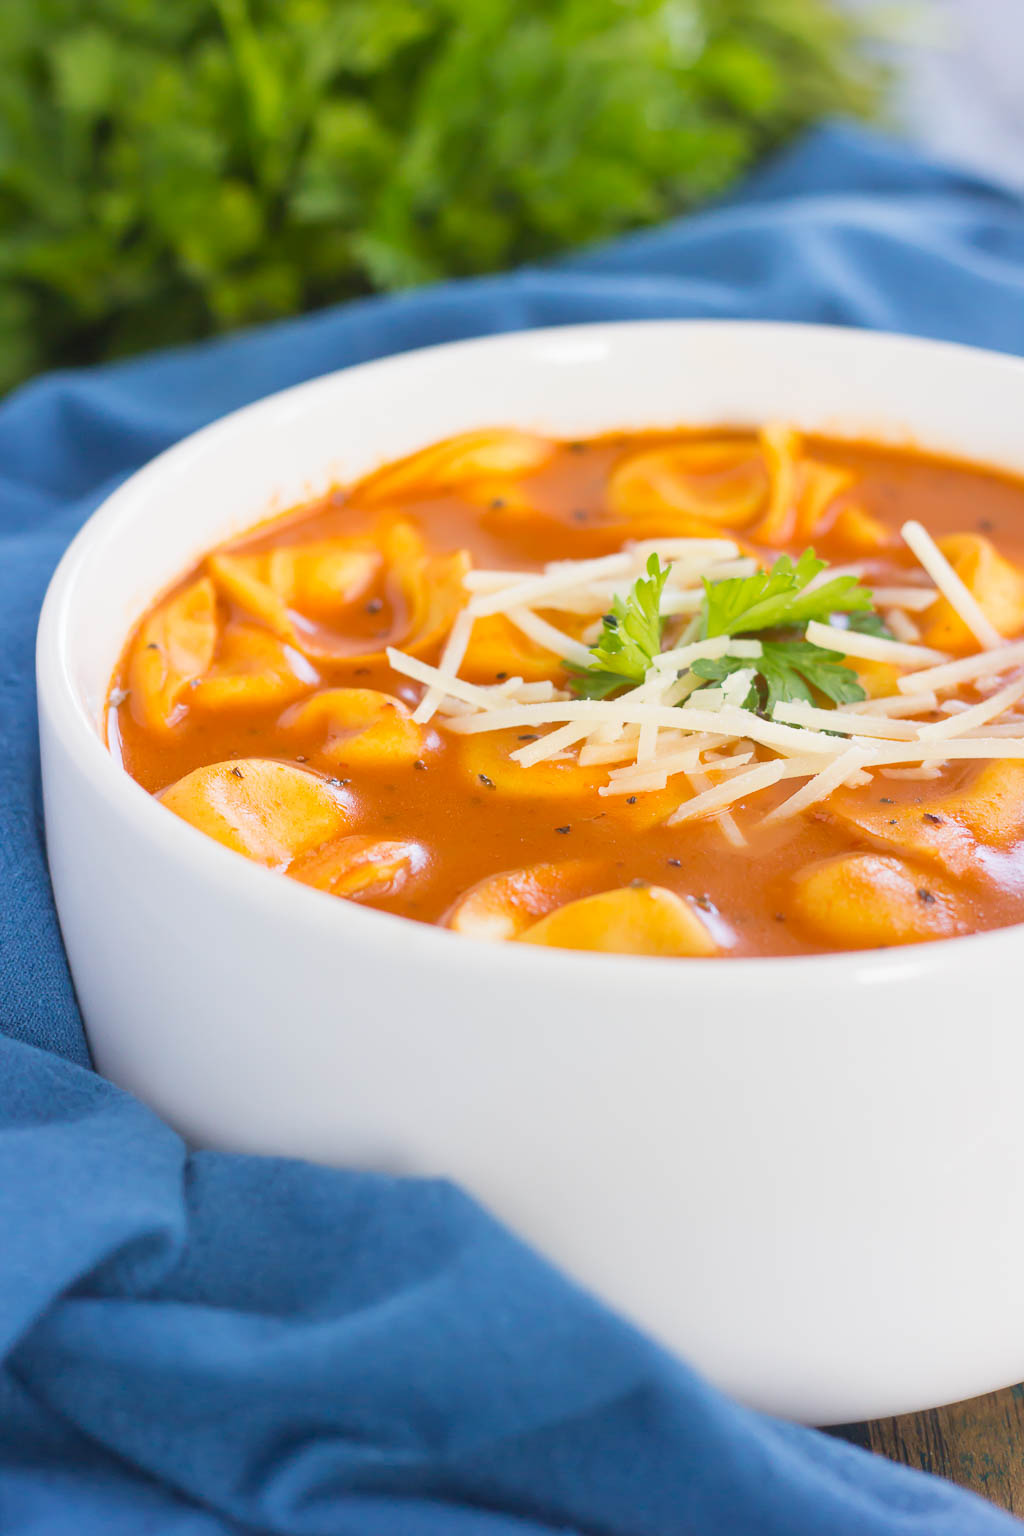 This Creamy Tomato Tortellini Soup is the perfect kind of comfort food for cold, winter days. Loaded with cheese tortellini, herbs, and made in one pot, you can have this rich and flavorful soup ready in less than thirty minutes!